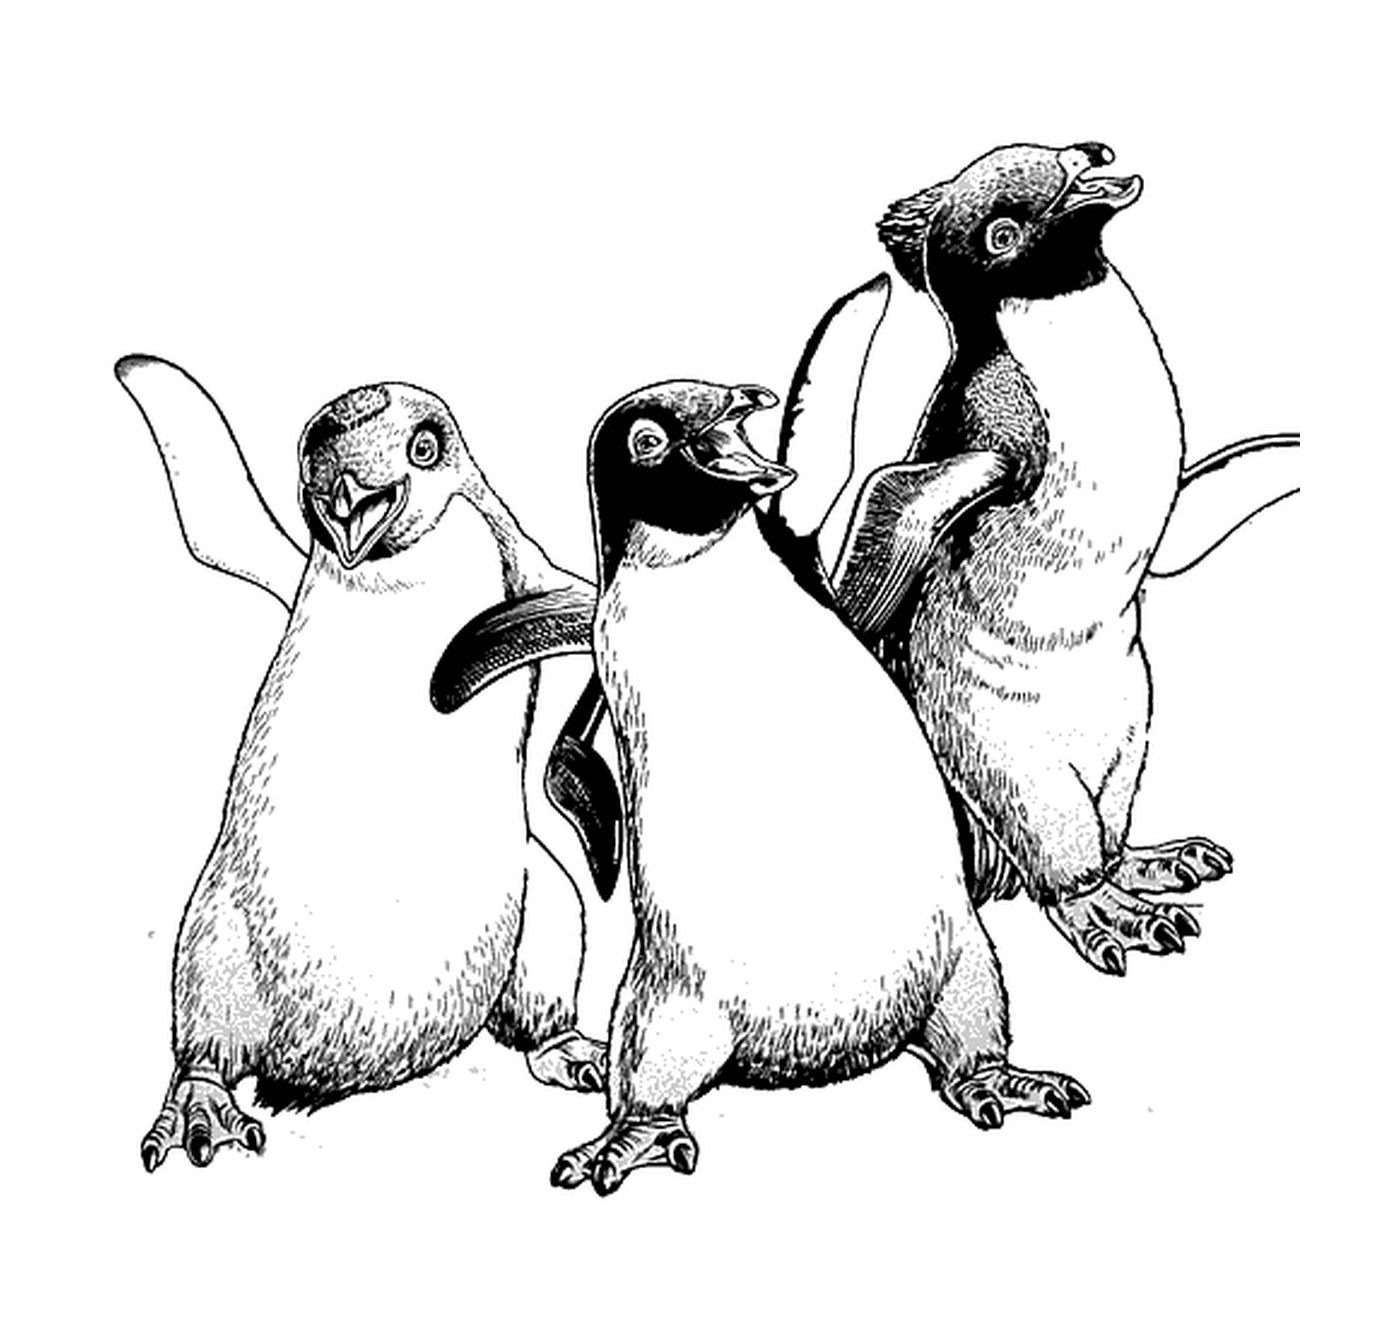  Group of three penguins side by side 